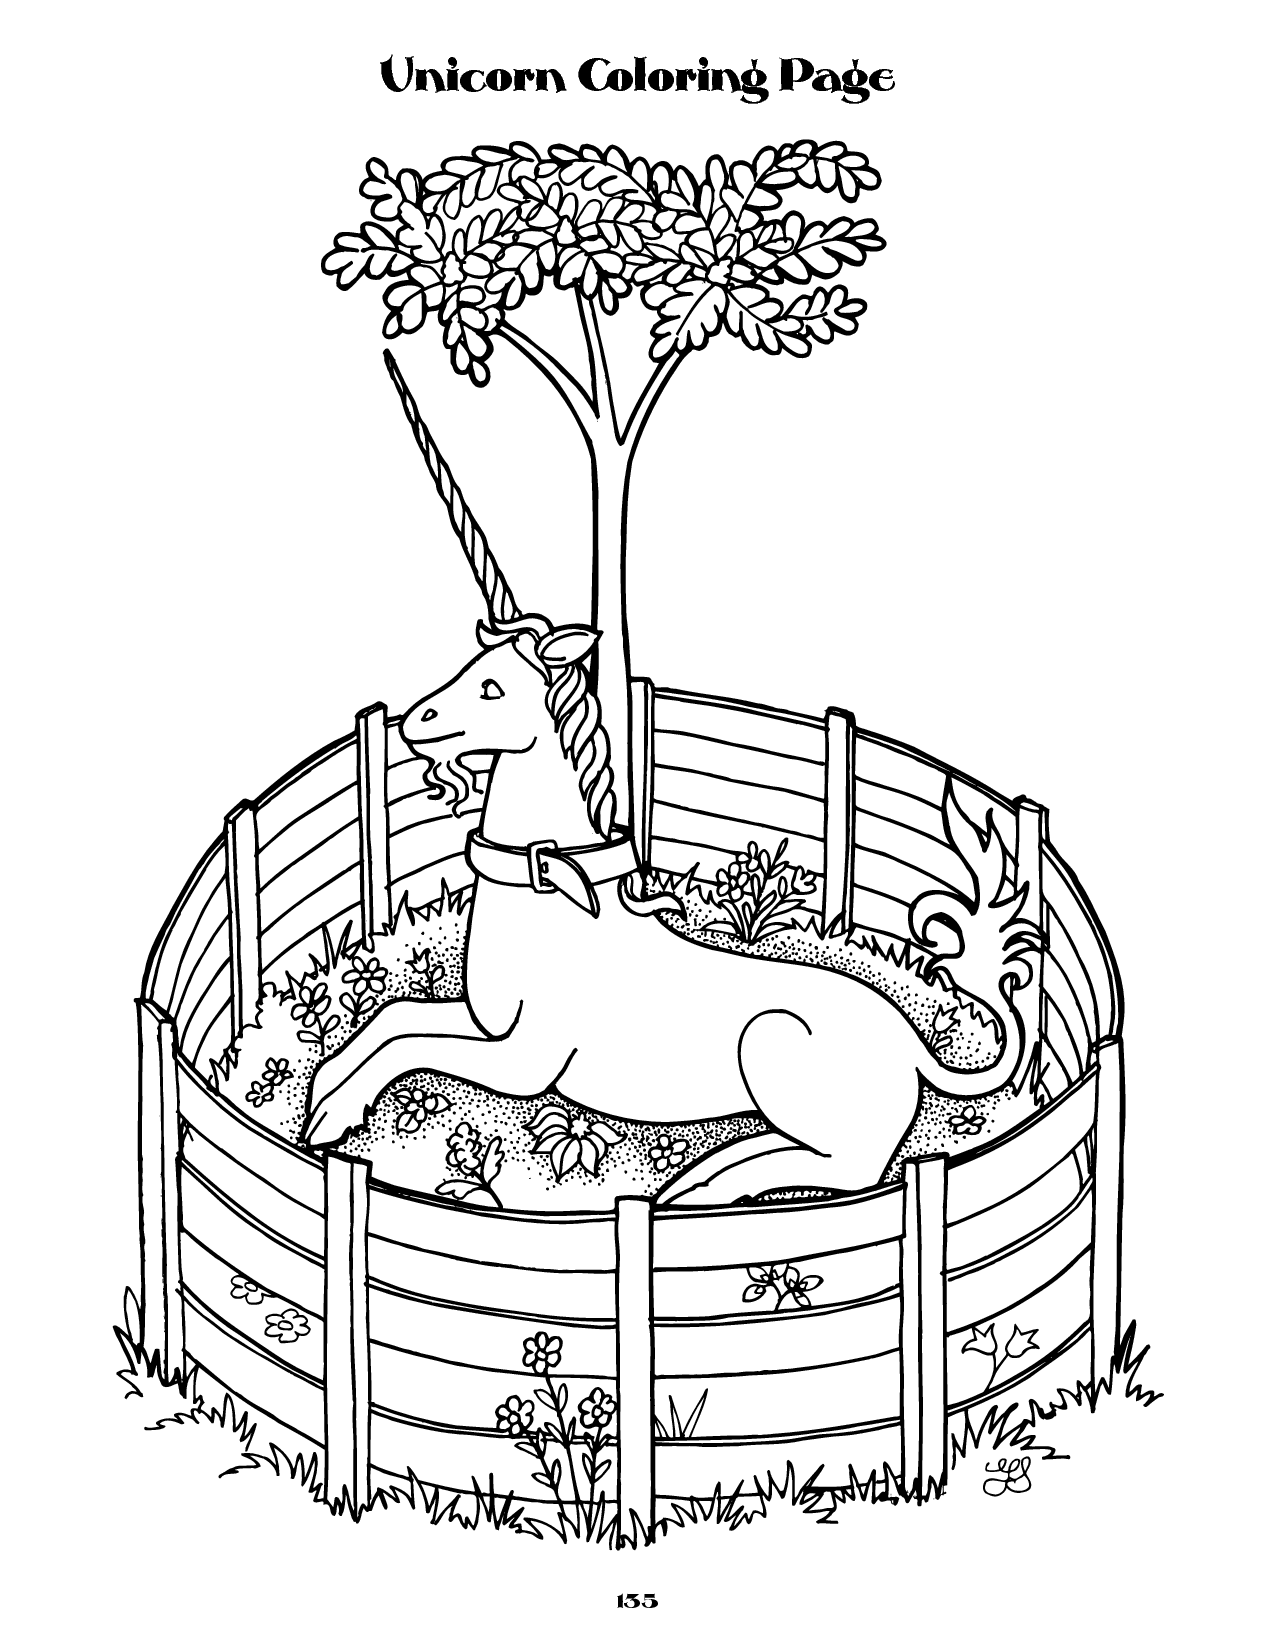 Latest Coloring Pages Archives - Page 30 of 42 - Coloring Pages